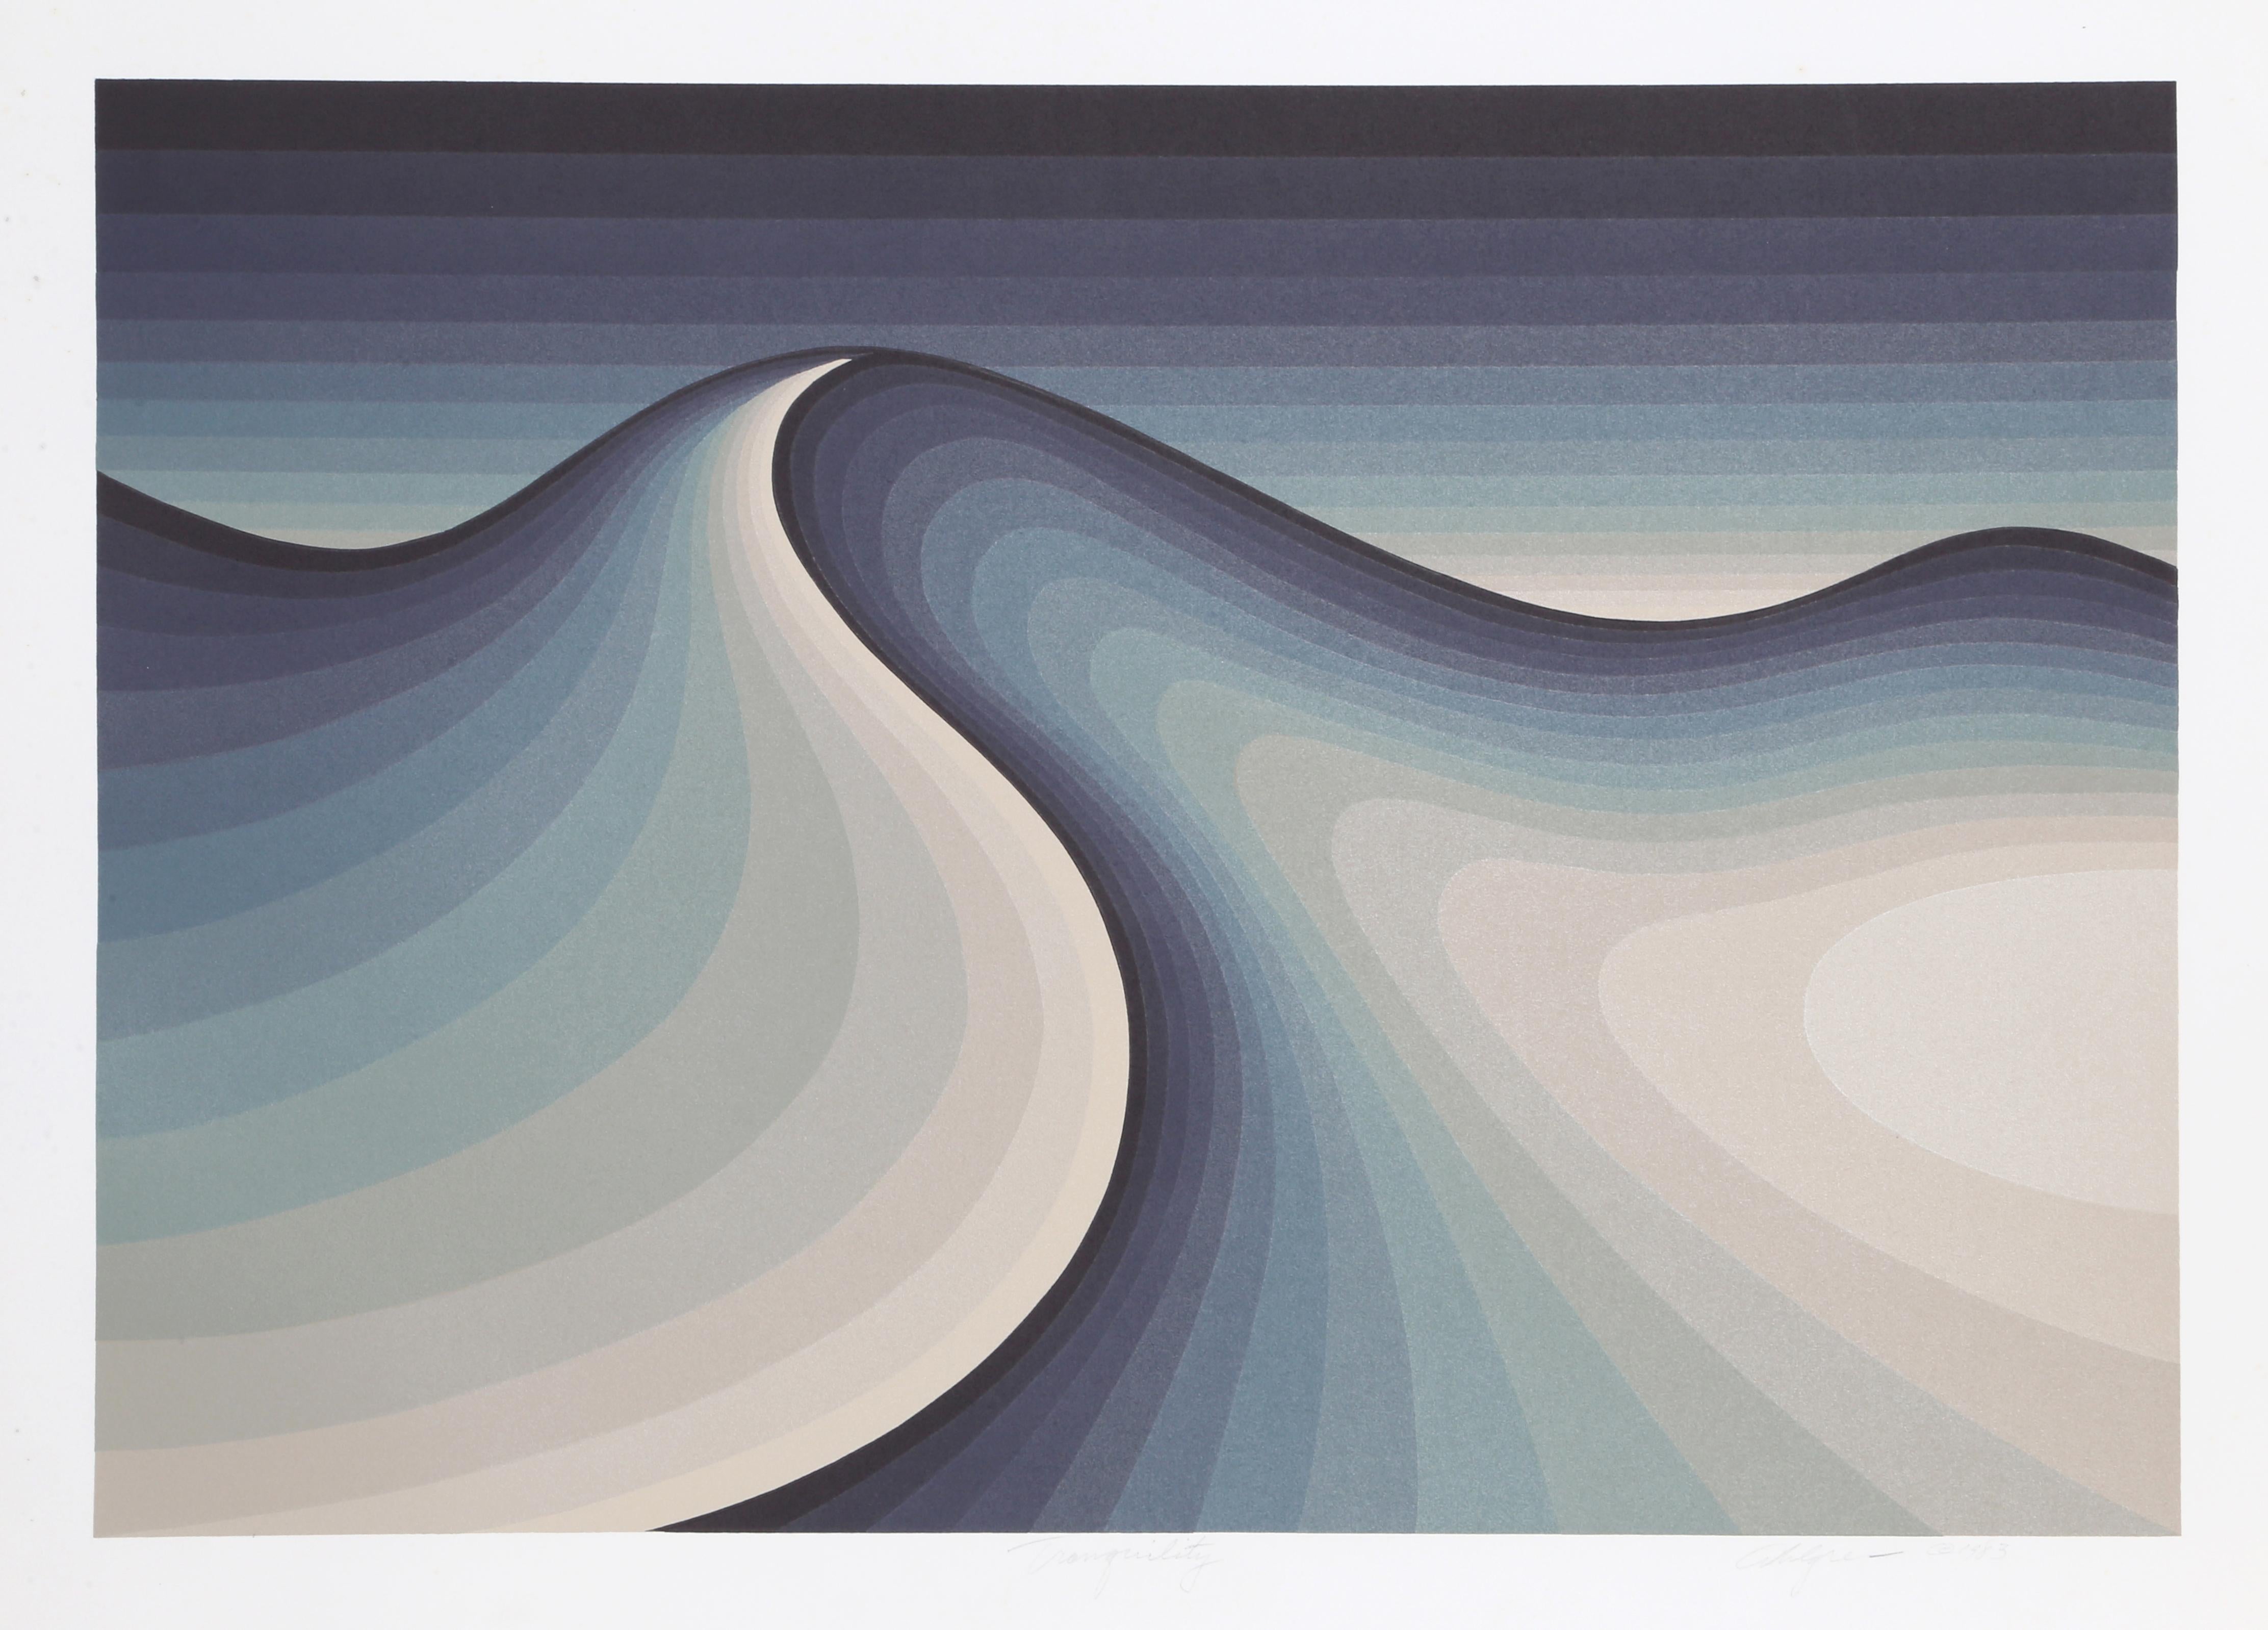 Artist: Roy Ahlgren, American (1927 - 2011)
Title: Tranquility
Year: 1983
Medium: Screenprint, signed and numbered in pencil
Edition: 150
Image Size: 18 x 25.5 inches
Size: 22 x 29.5 in. (55.88 x 74.93 cm)